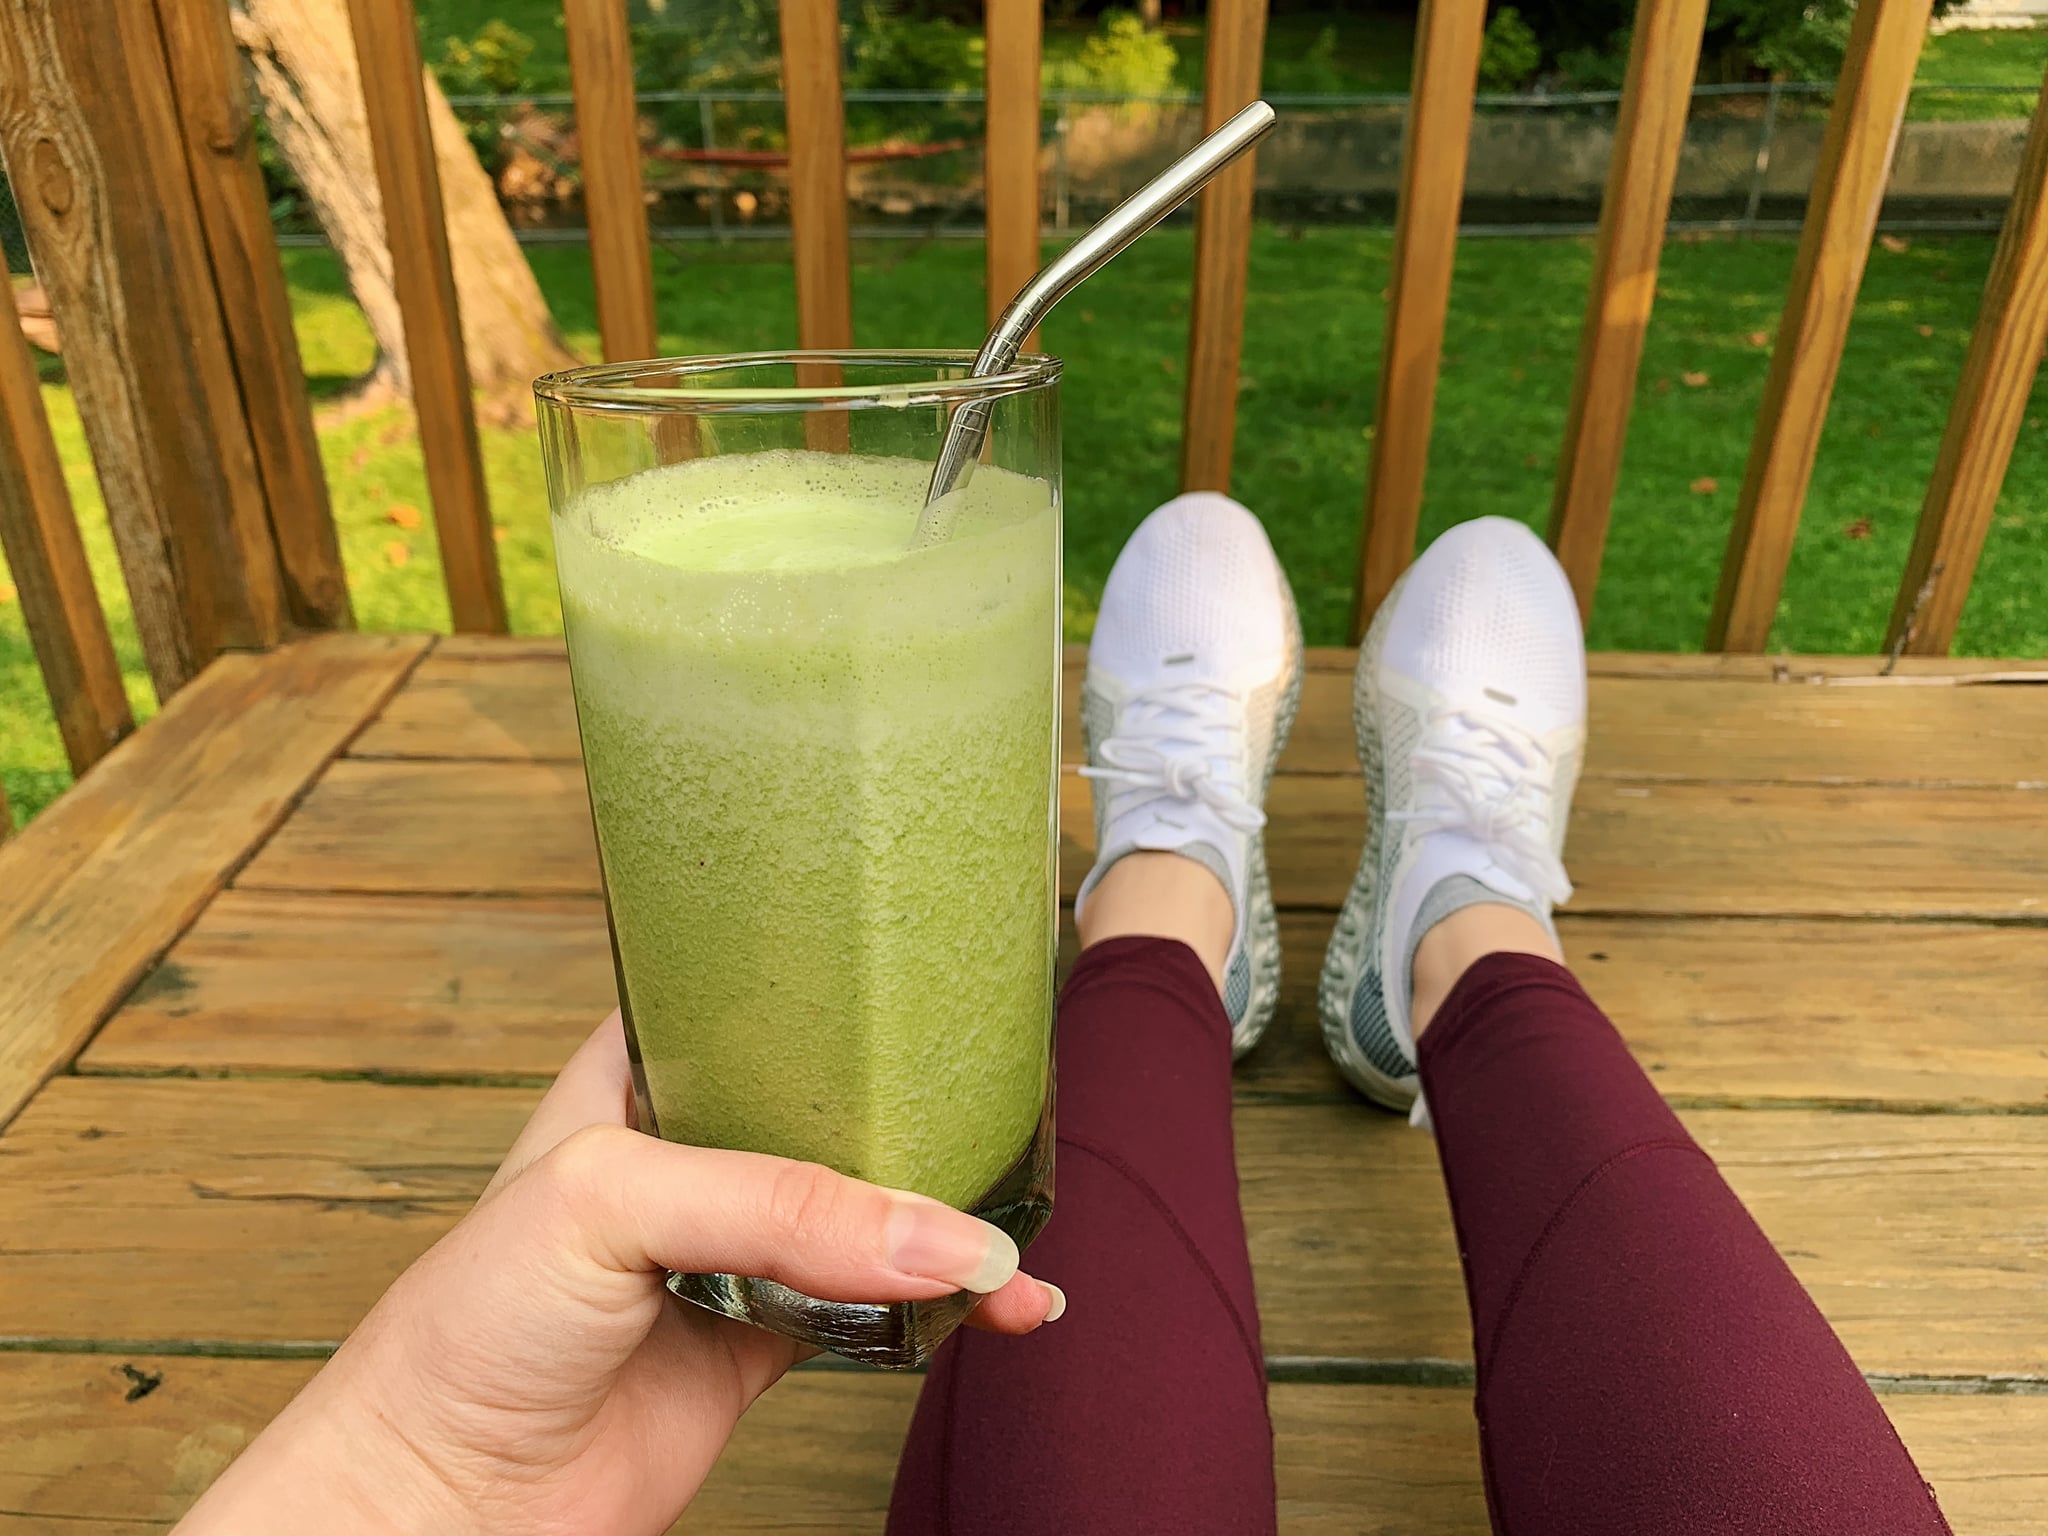 Post Workout Green Smoothie